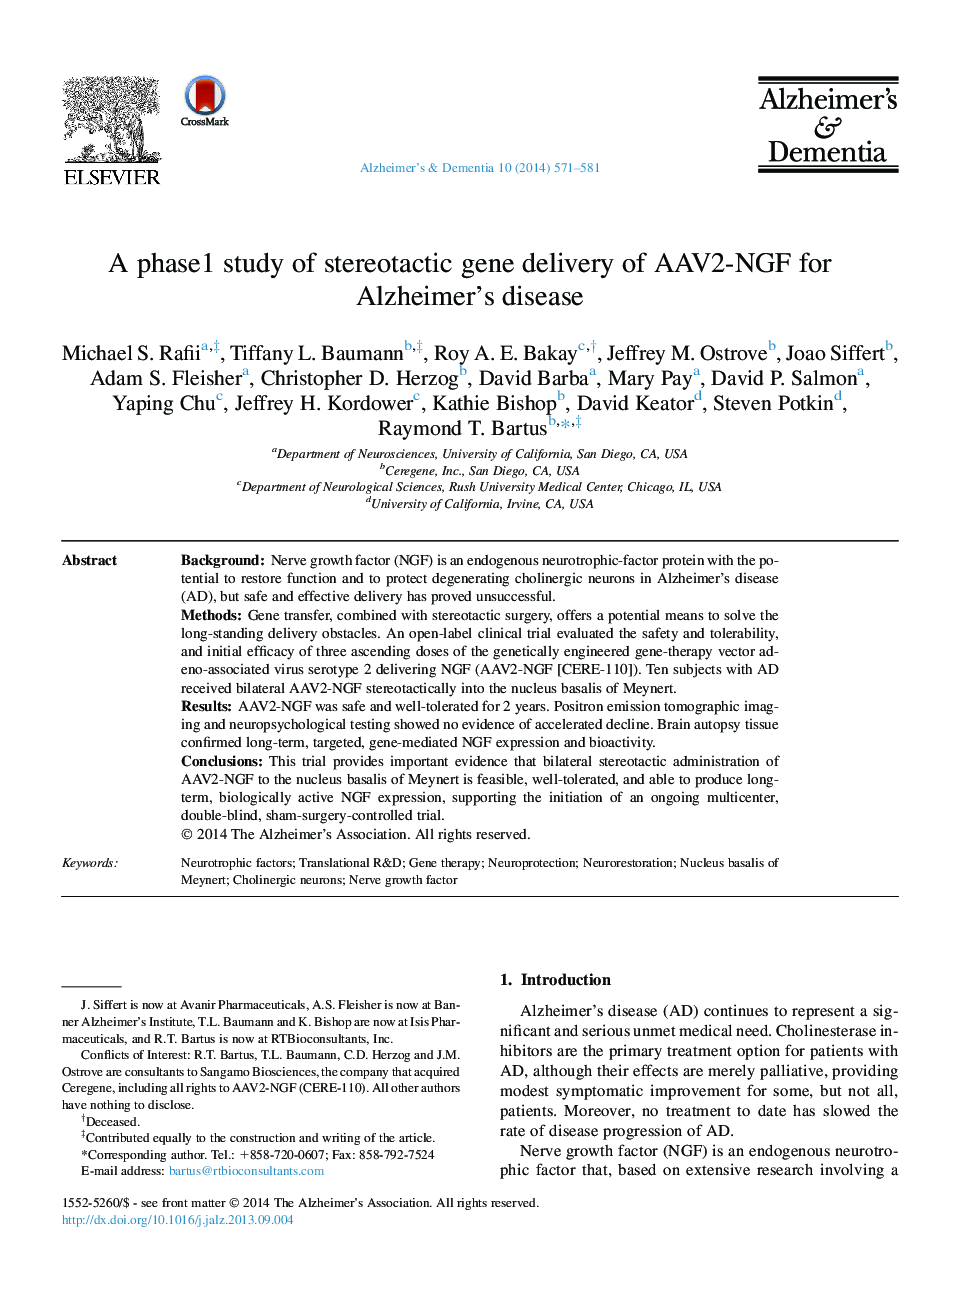 Featured ArticleA phase1 study of stereotactic gene delivery of AAV2-NGF for Alzheimer's disease